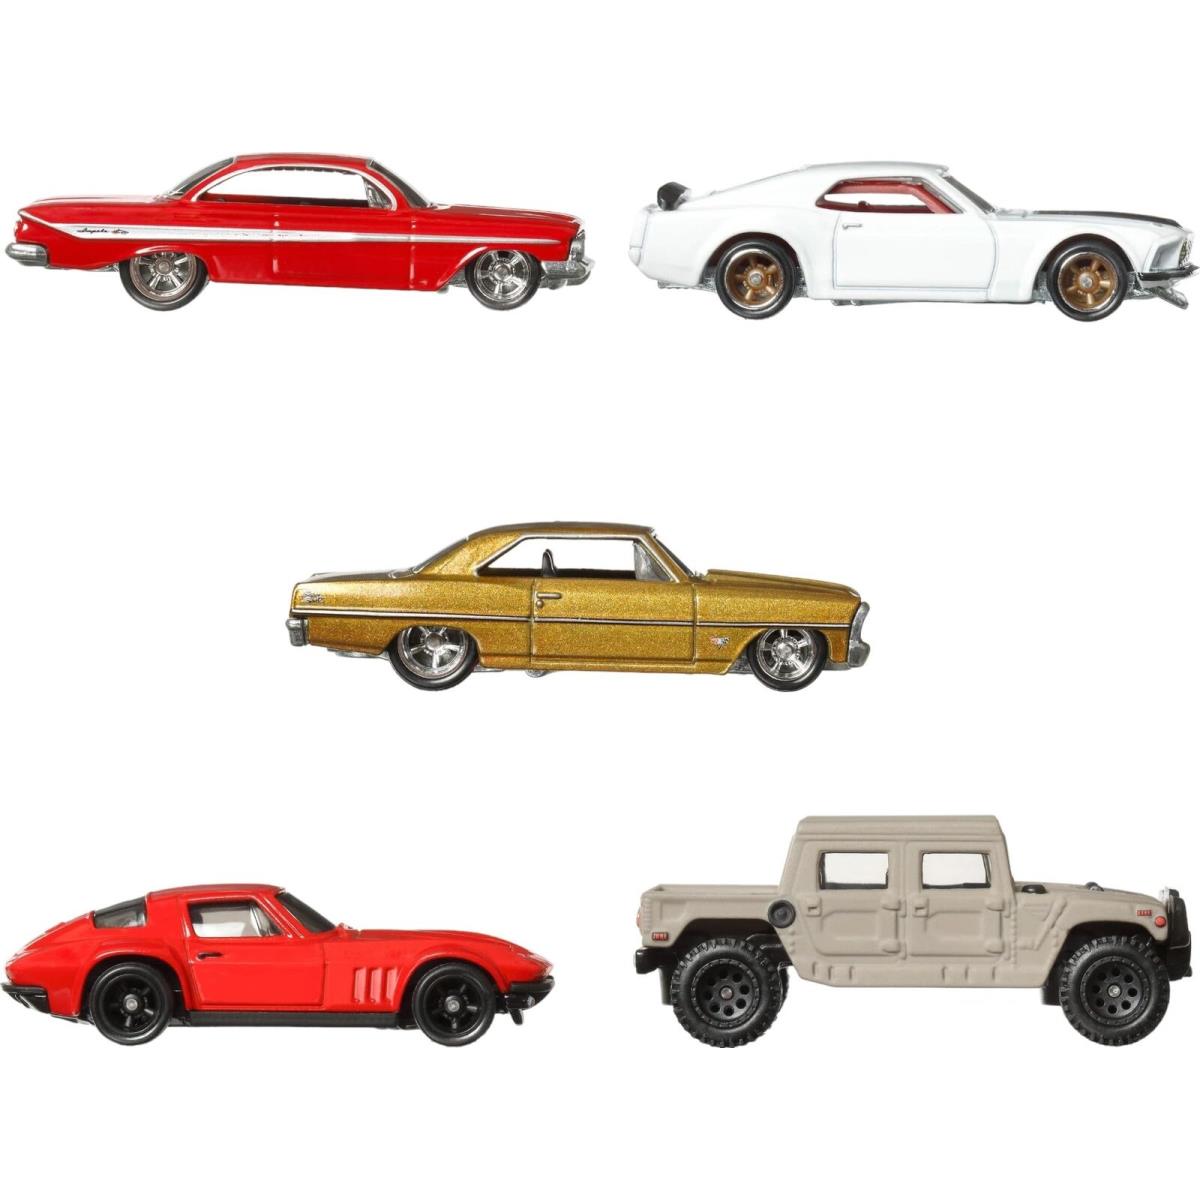 Cars Premium Fast Furious 1:64 Scale 5-Pack Die-cast Toy Cars For